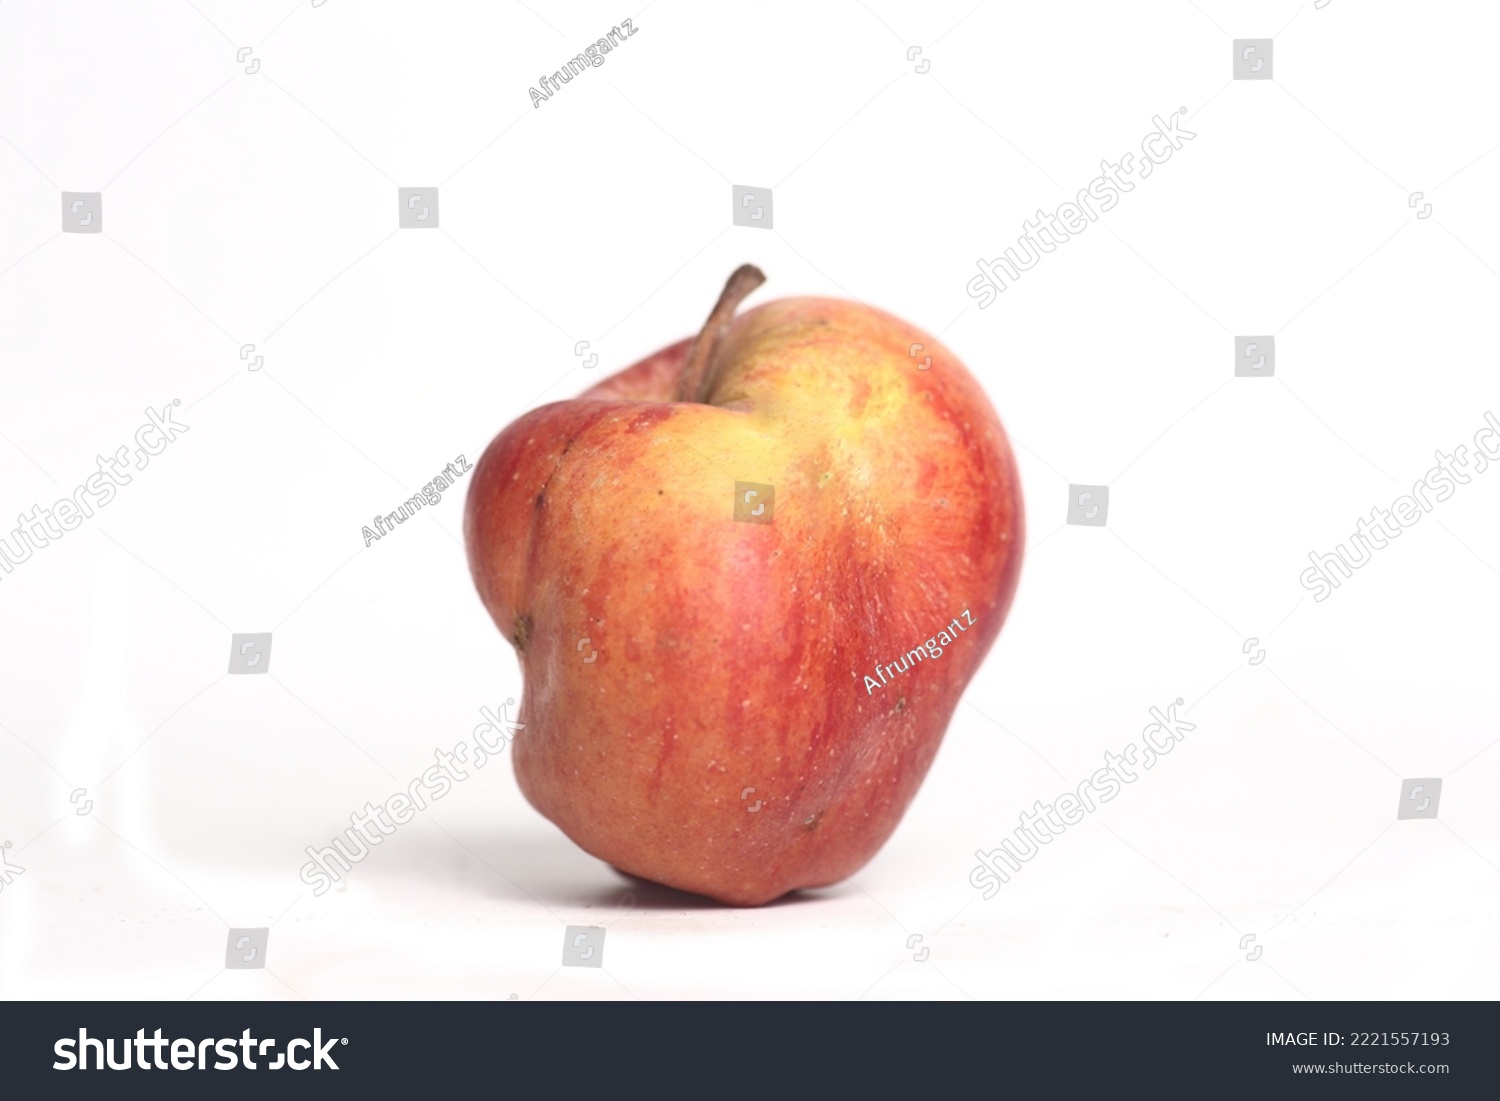 Concept of ugly food - red apple on white background. Image contains copy space #2221557193